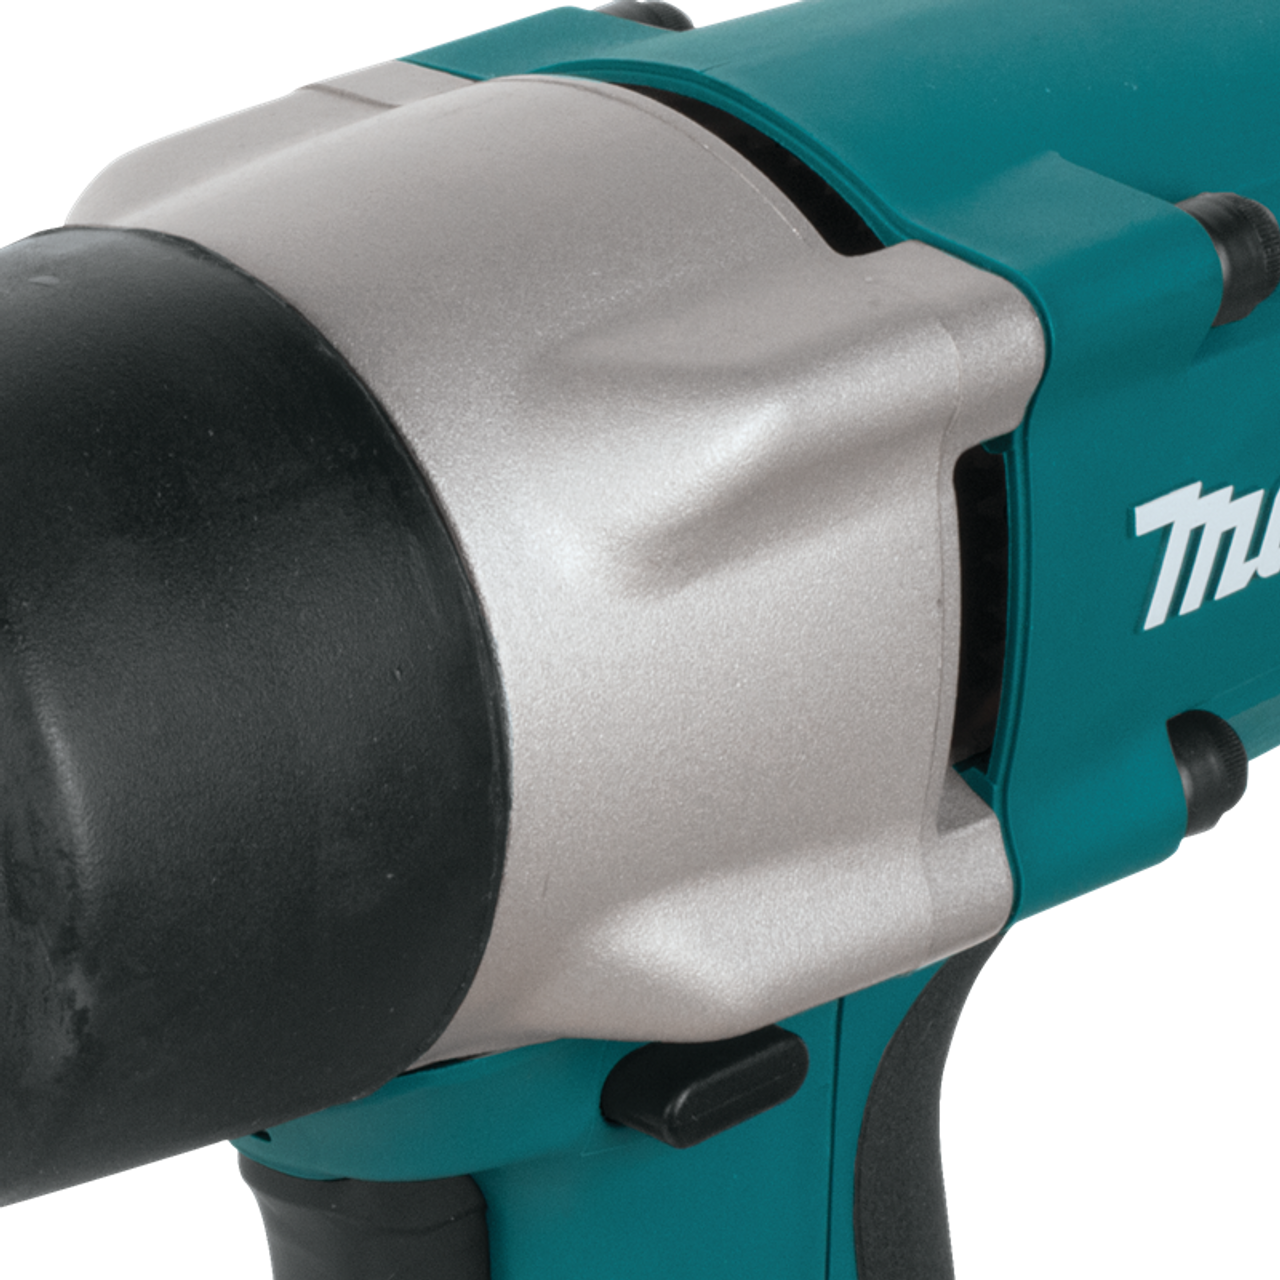 1/2" Impact Wrench w/ Detent Pin Anvil, externally accessible brushes, TW0200